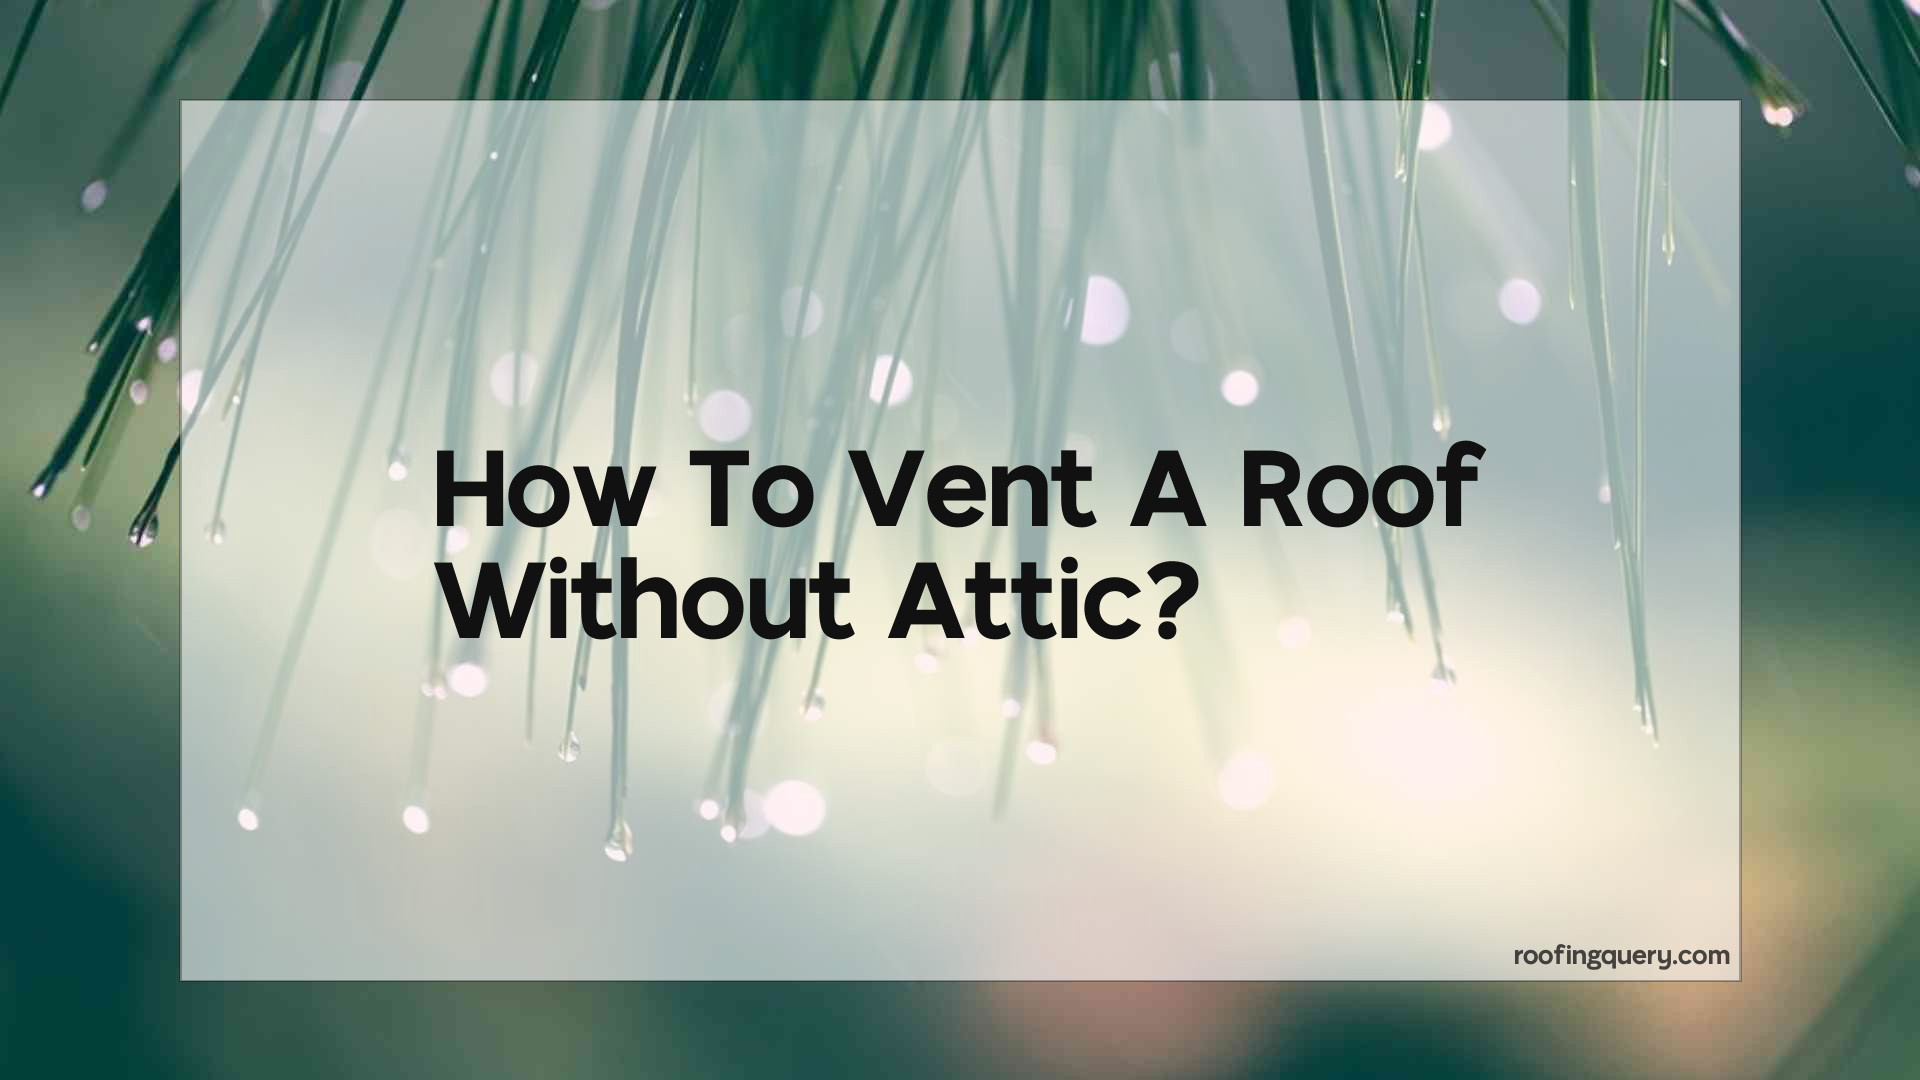 How To Vent A Roof Without Attic